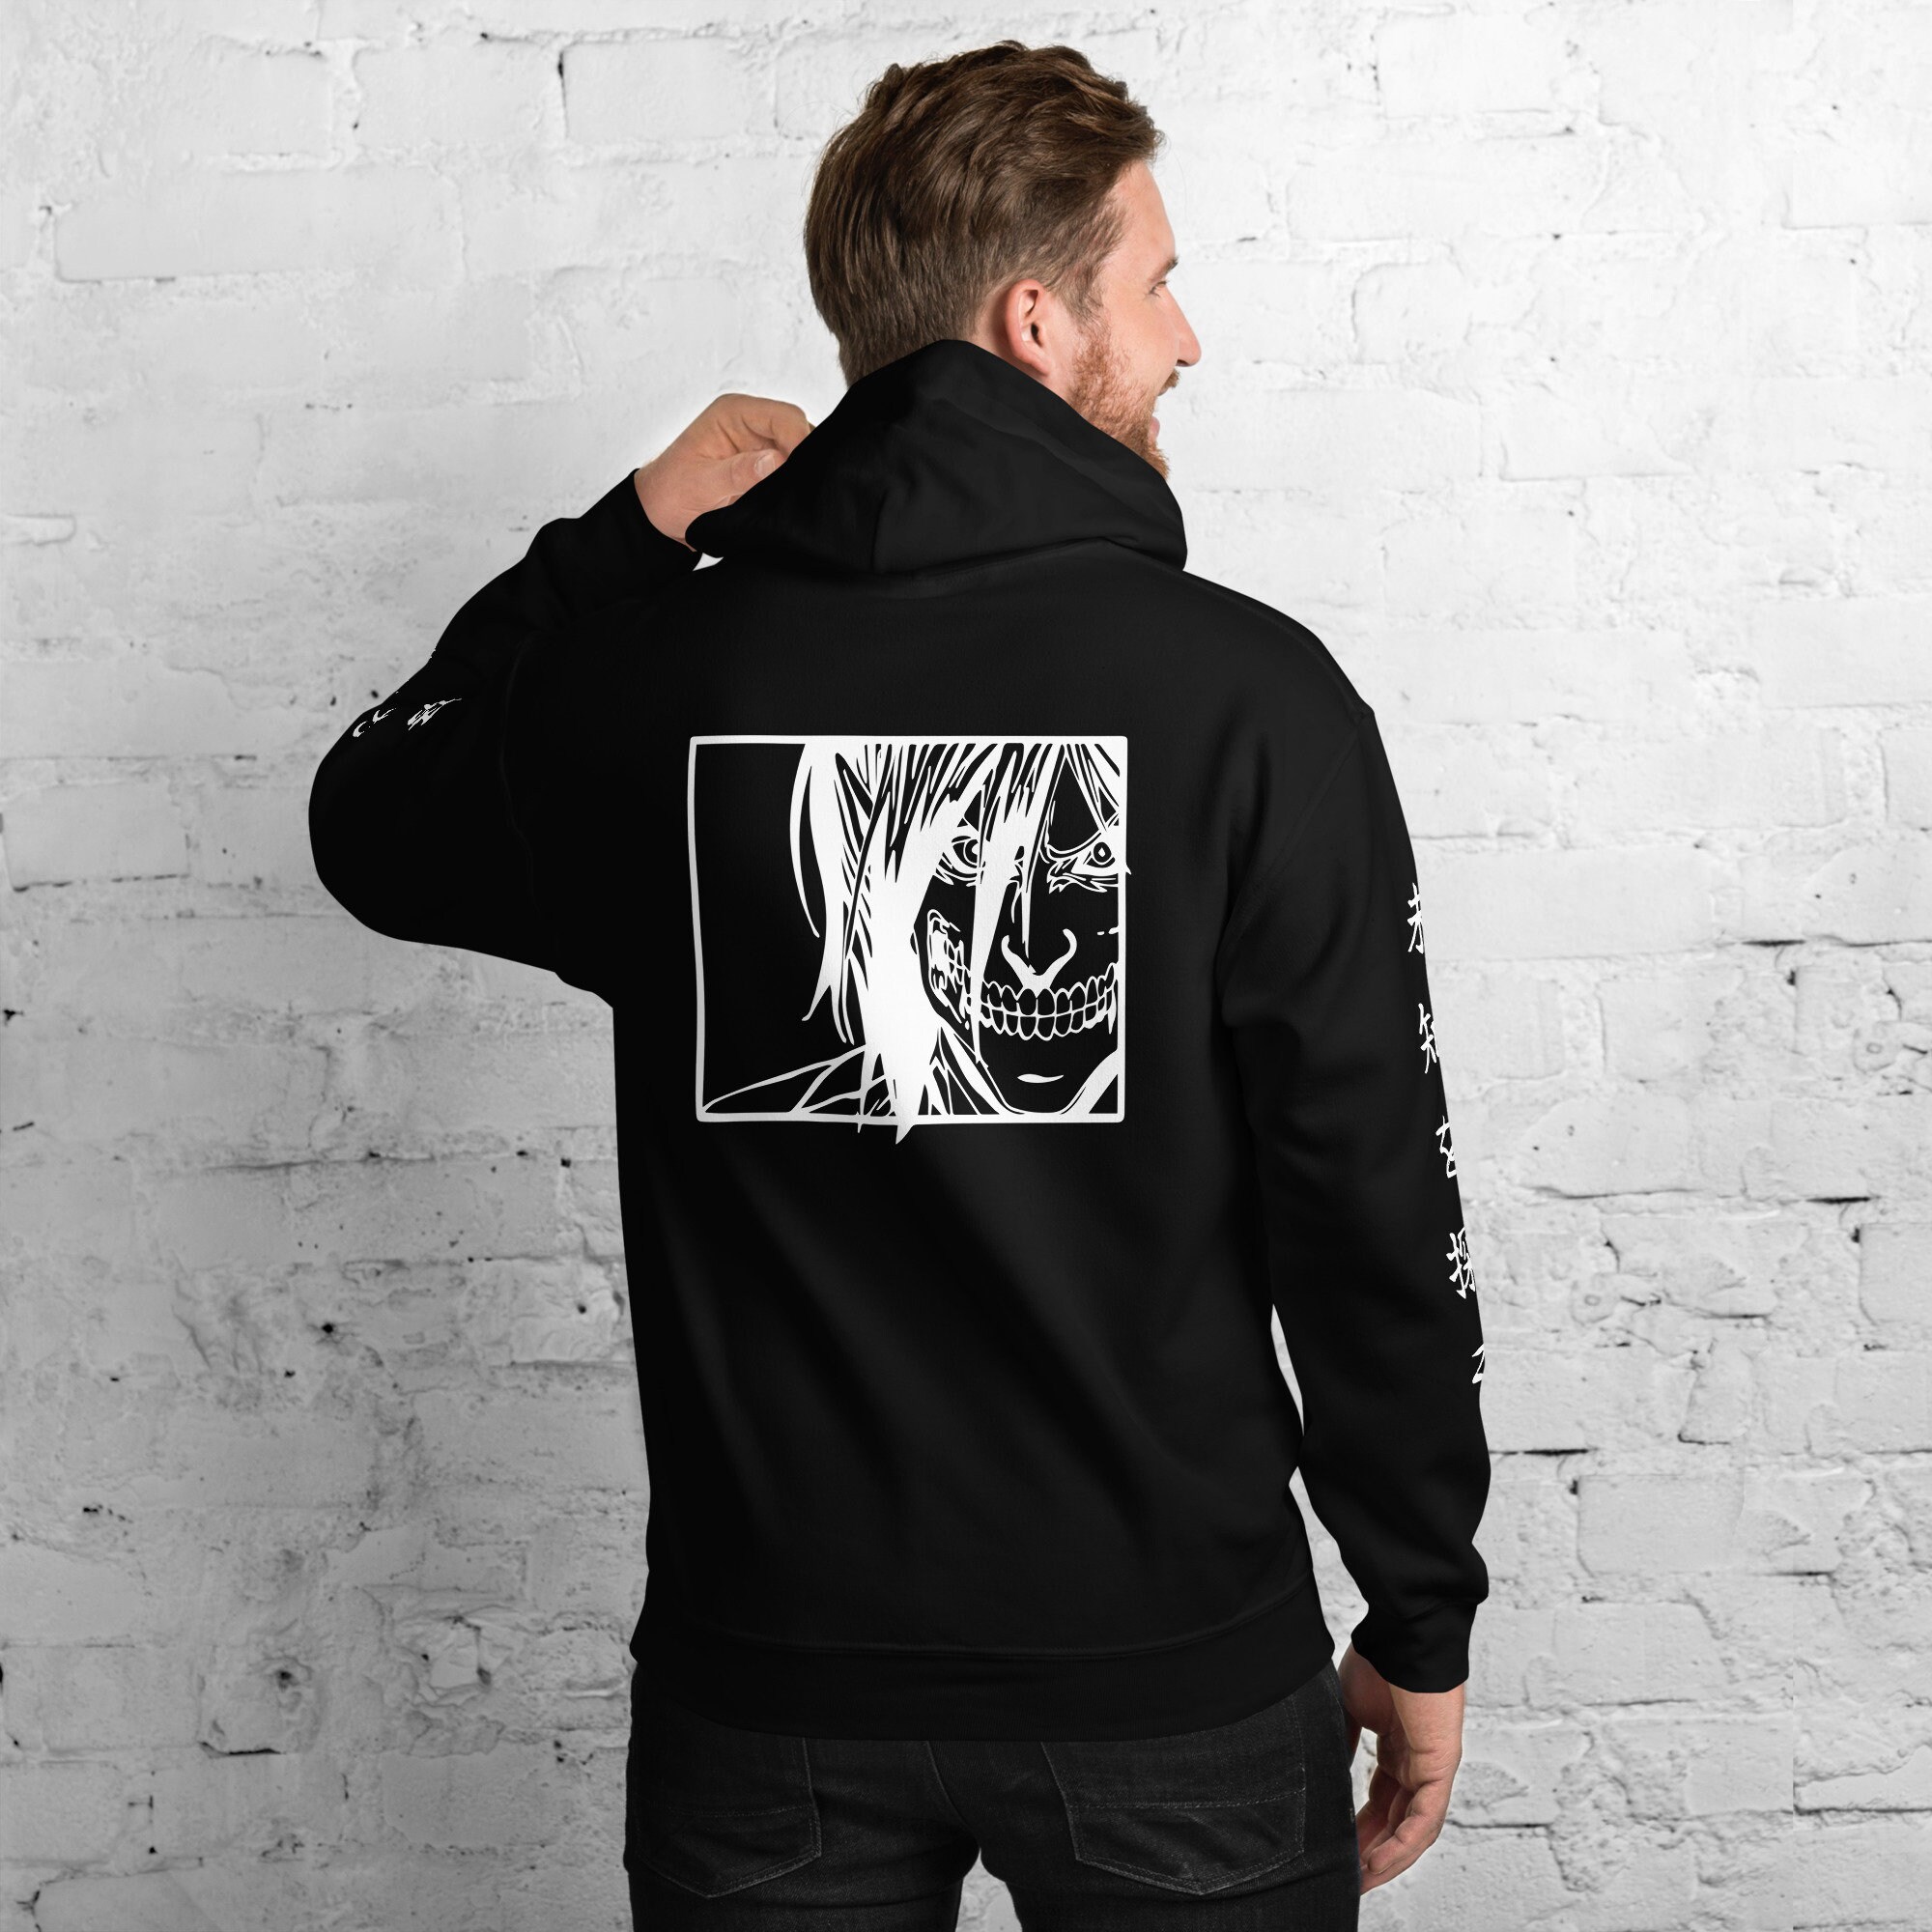 Anime hoodies  Buy the best product with free shipping on AliExpress